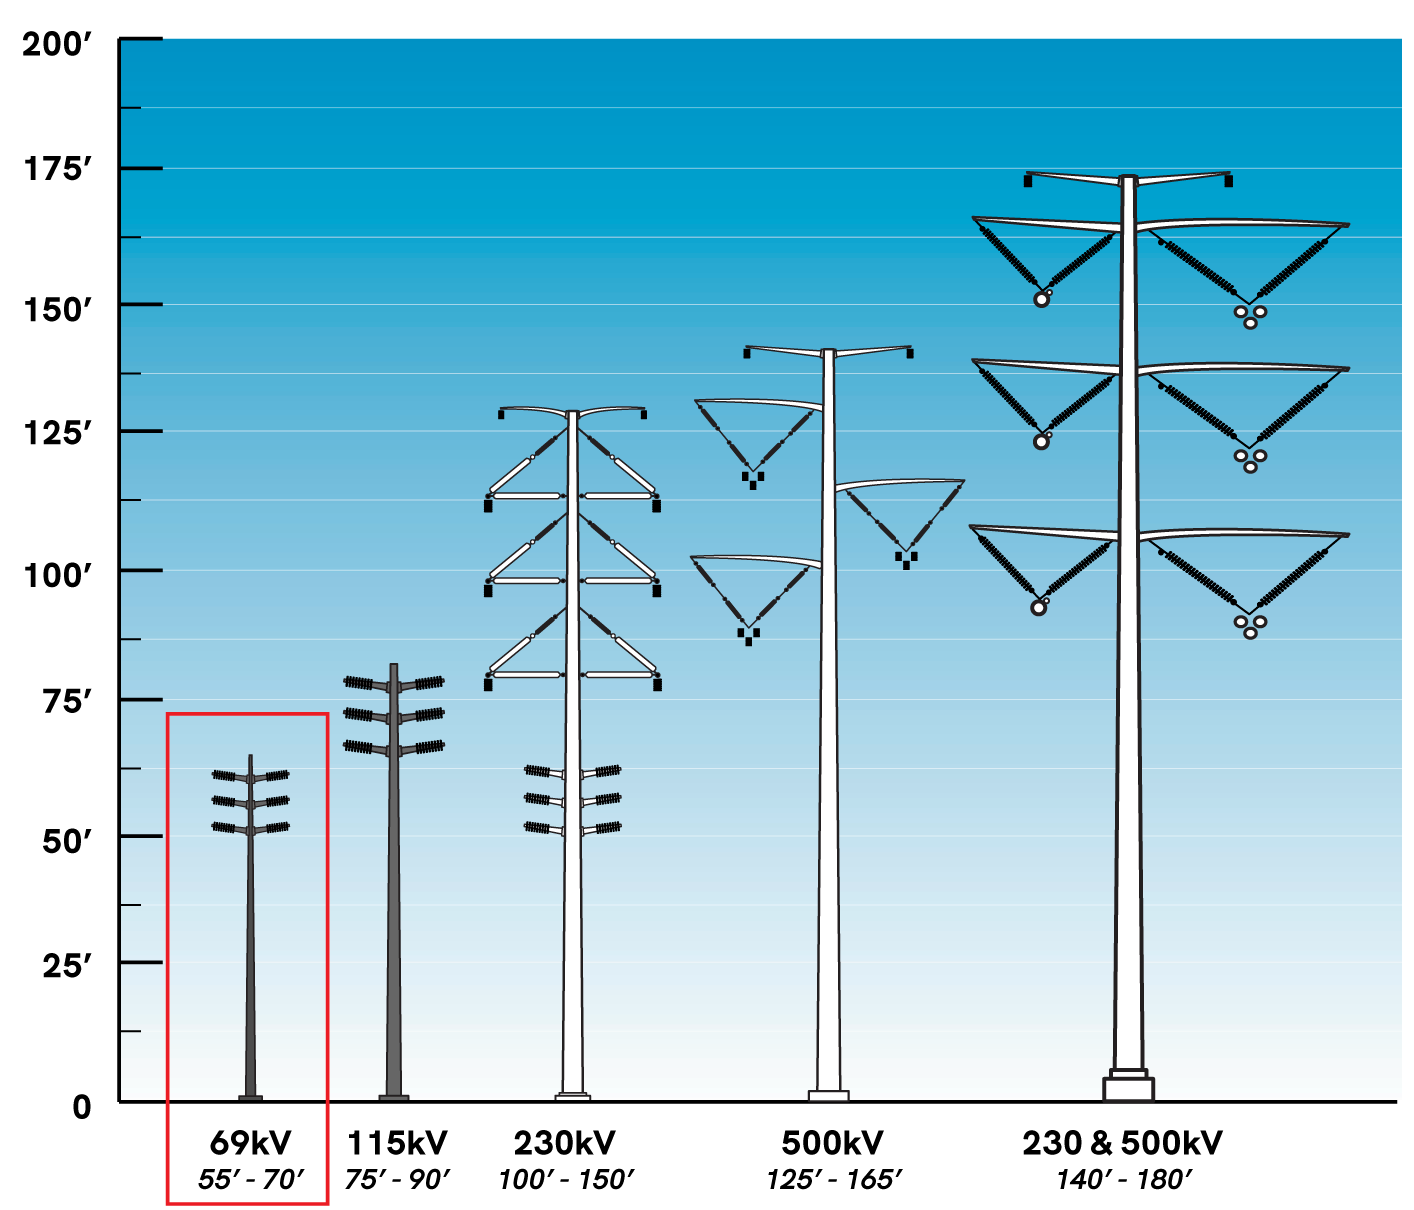 Graphic of five power poles side-by-side and their associated heights.